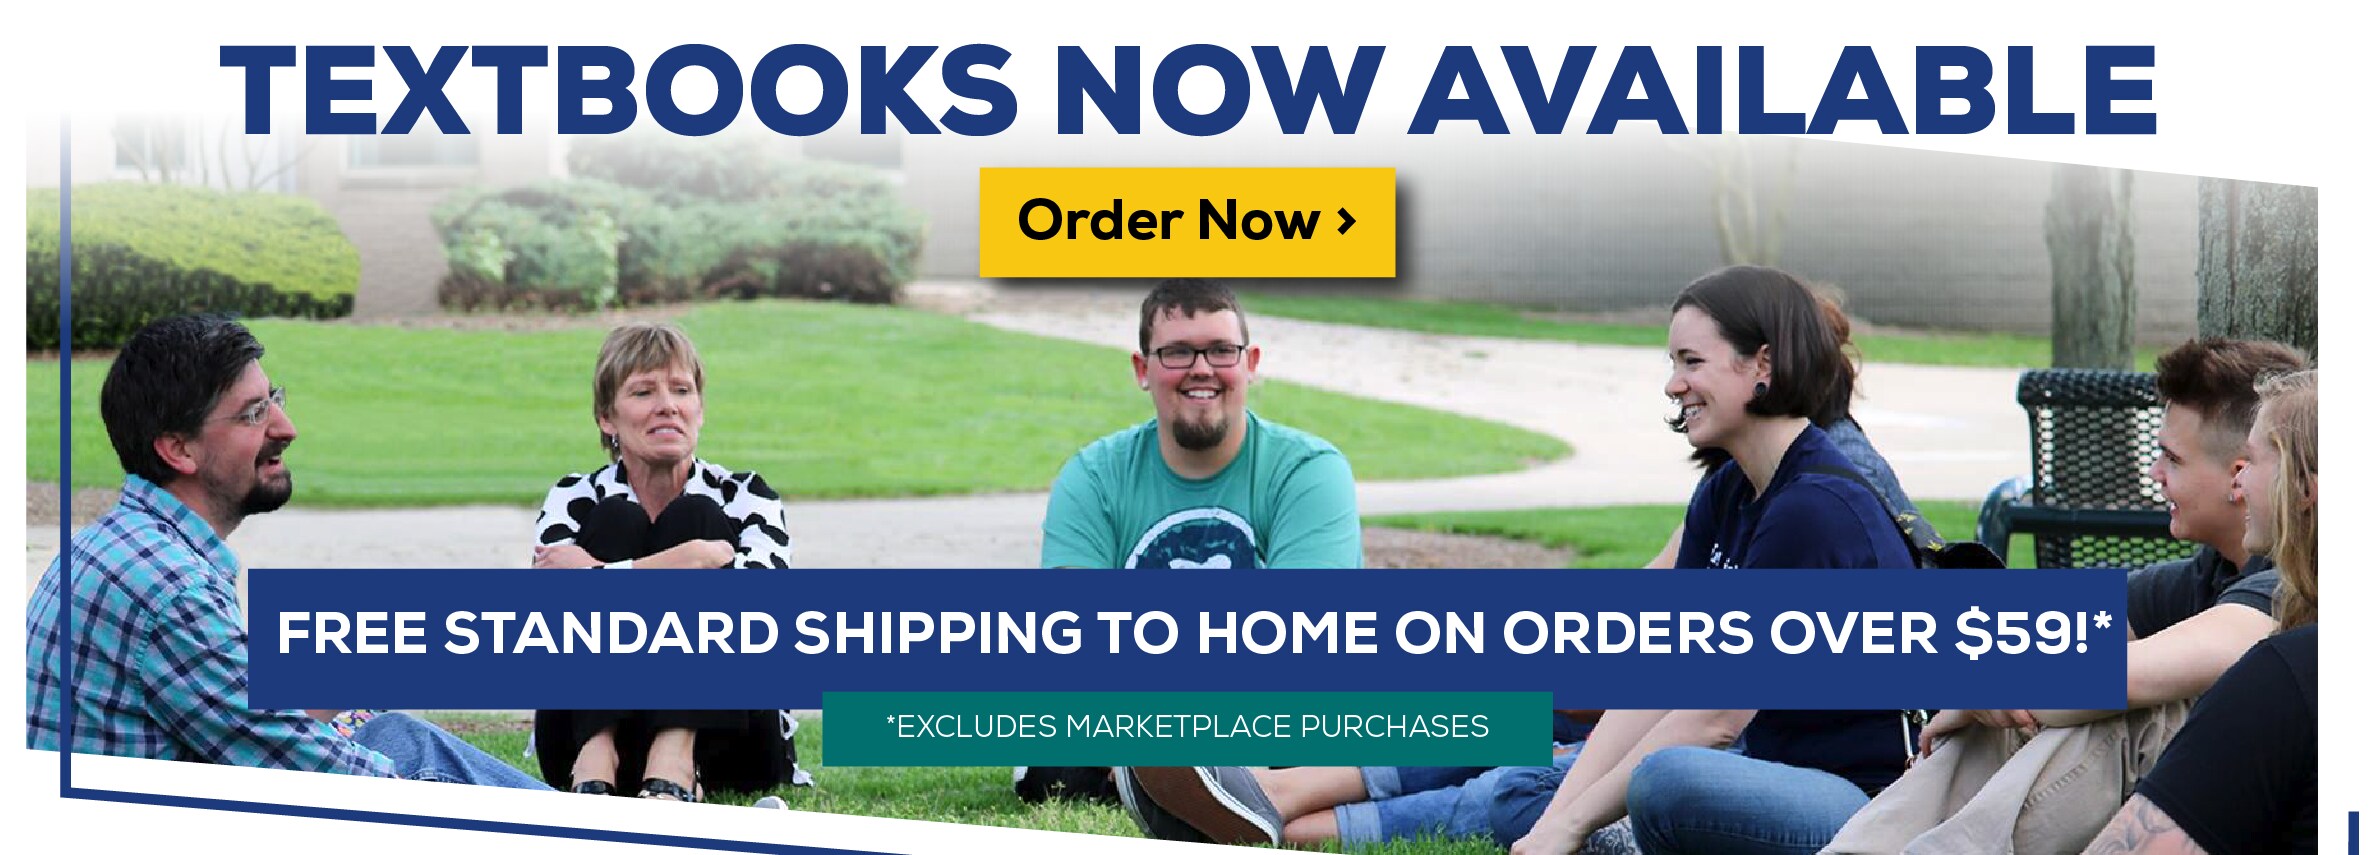 Textbooks Now Available. Free standard shipping to home on orders over $59